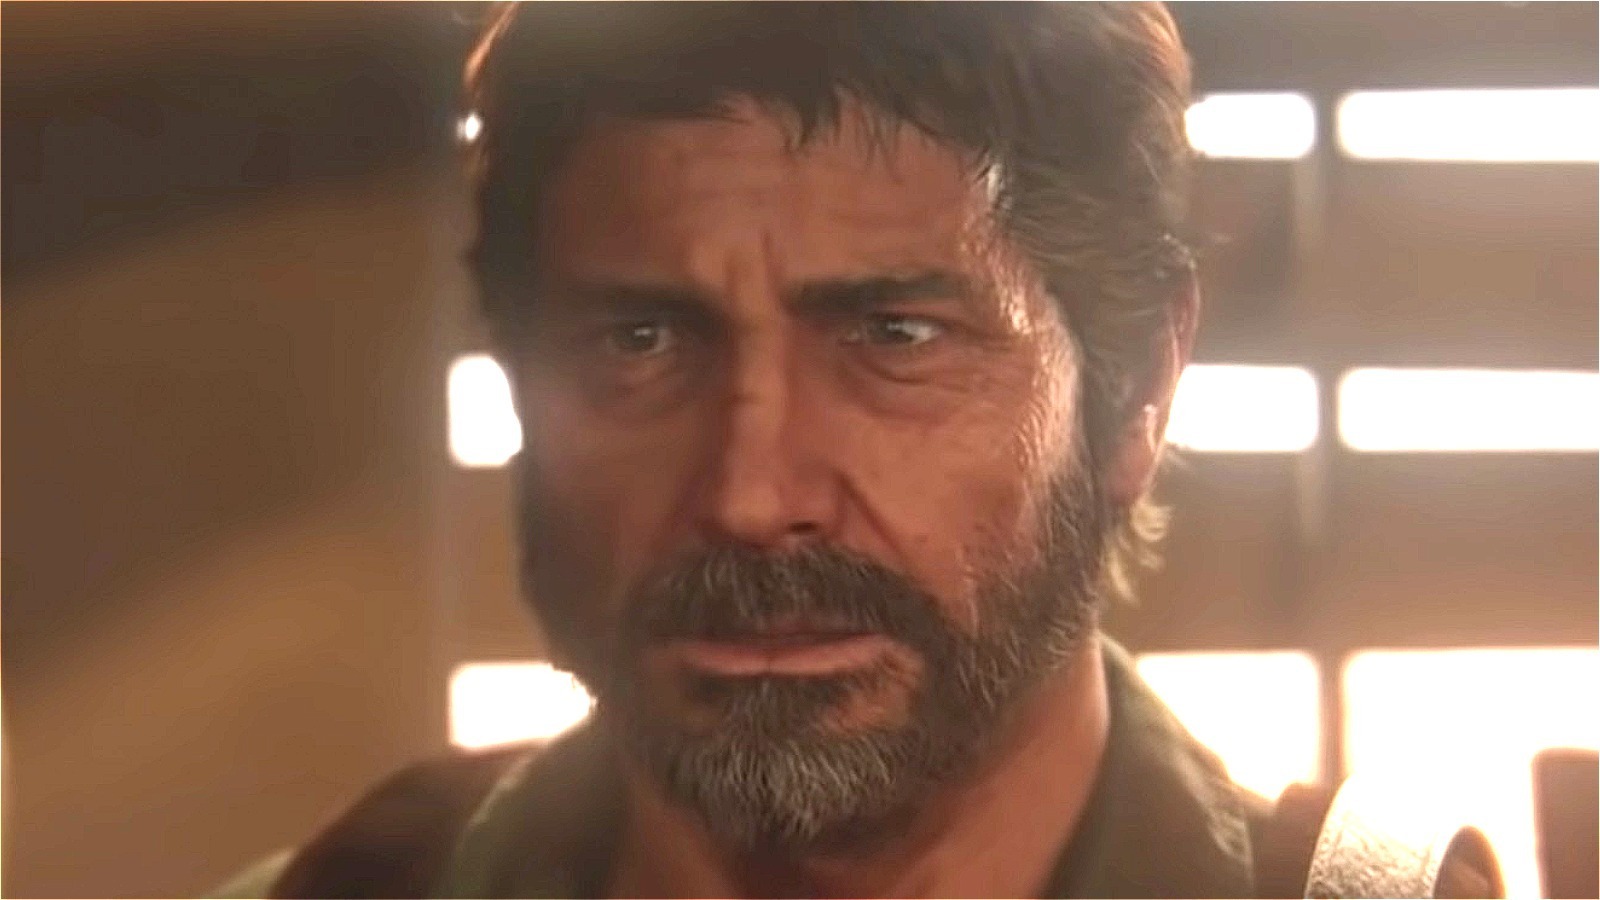 Is Joel The Real Villain Of HBO's 'The Last Of Us'?